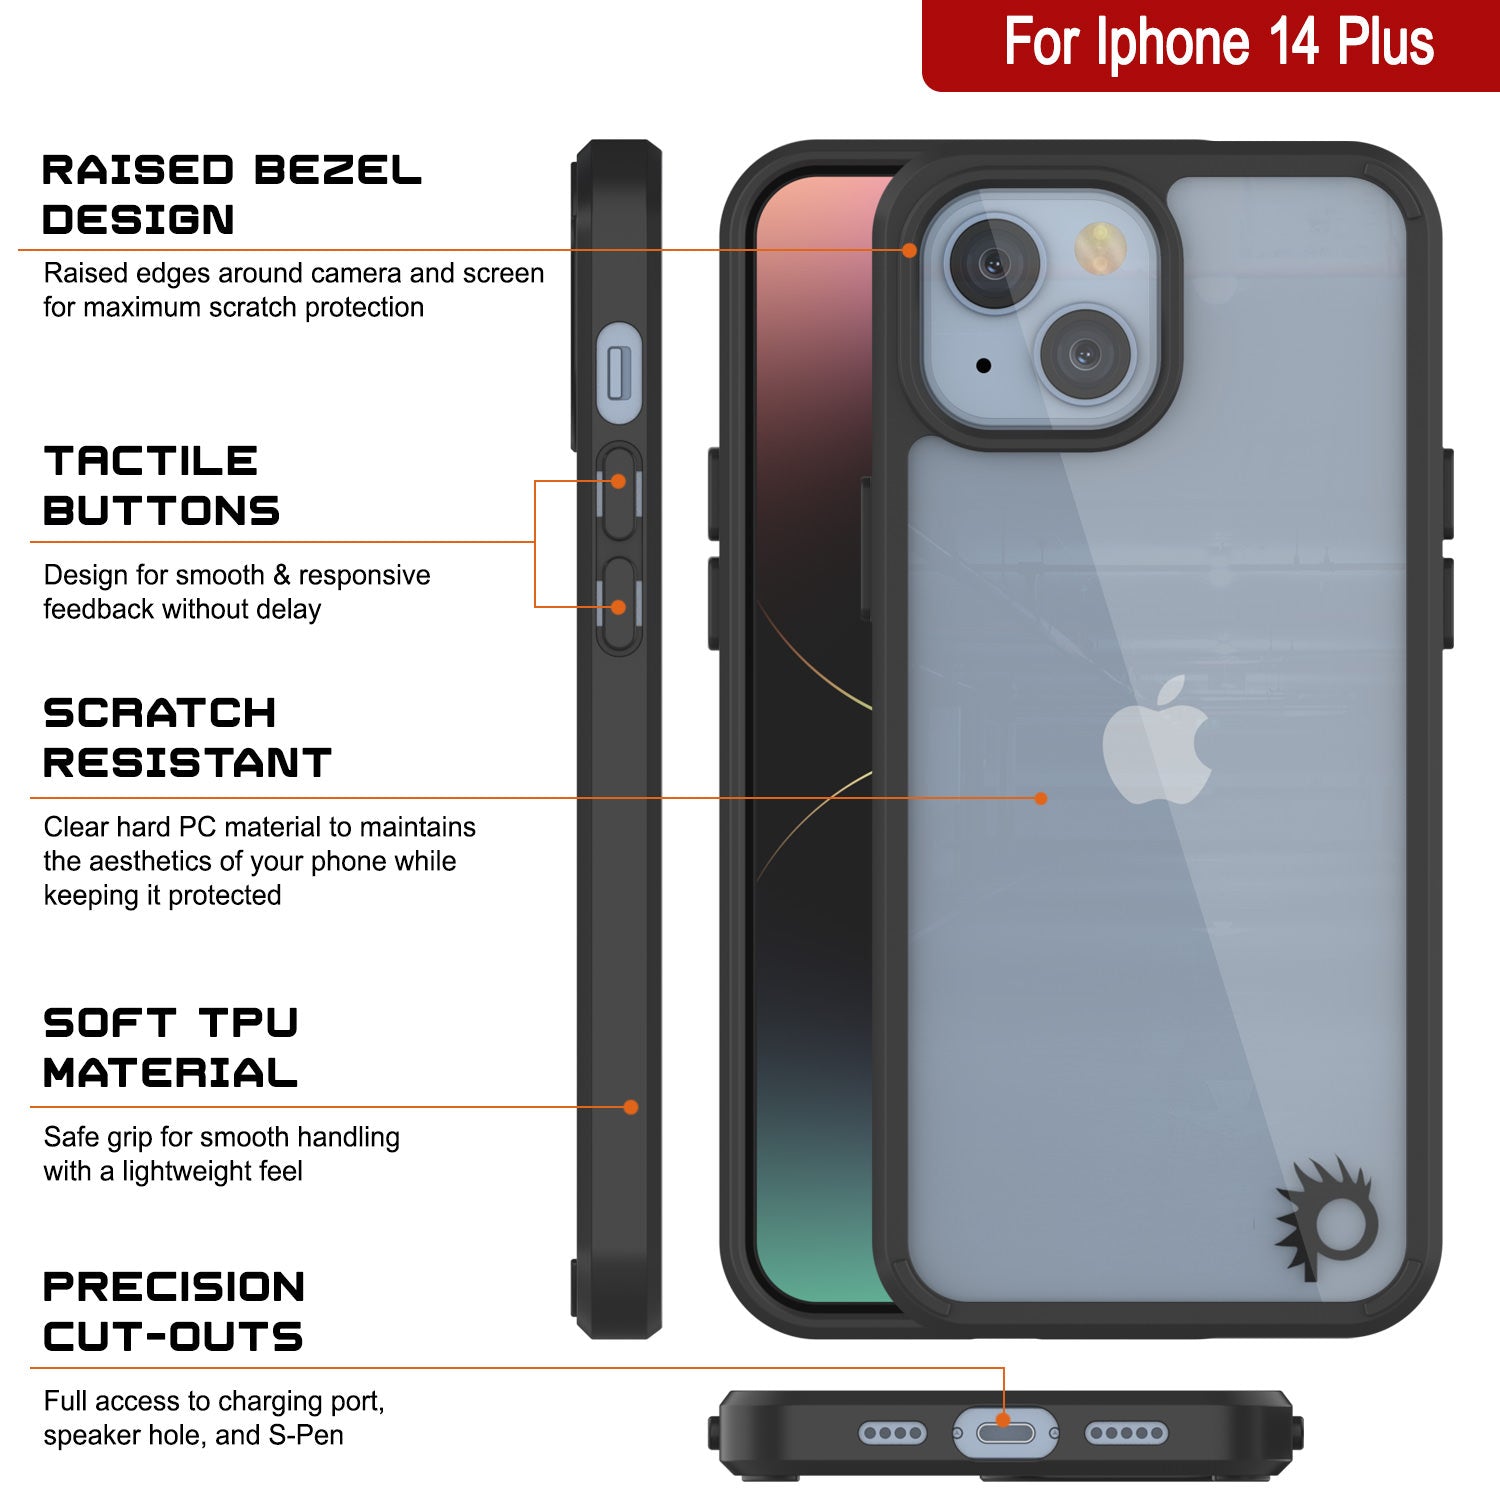 iPhone 15 Plus Case Punkcase® LUCID 2.0 Red Series Series w/ PUNK SHIELD Screen Protector | Ultra Fit